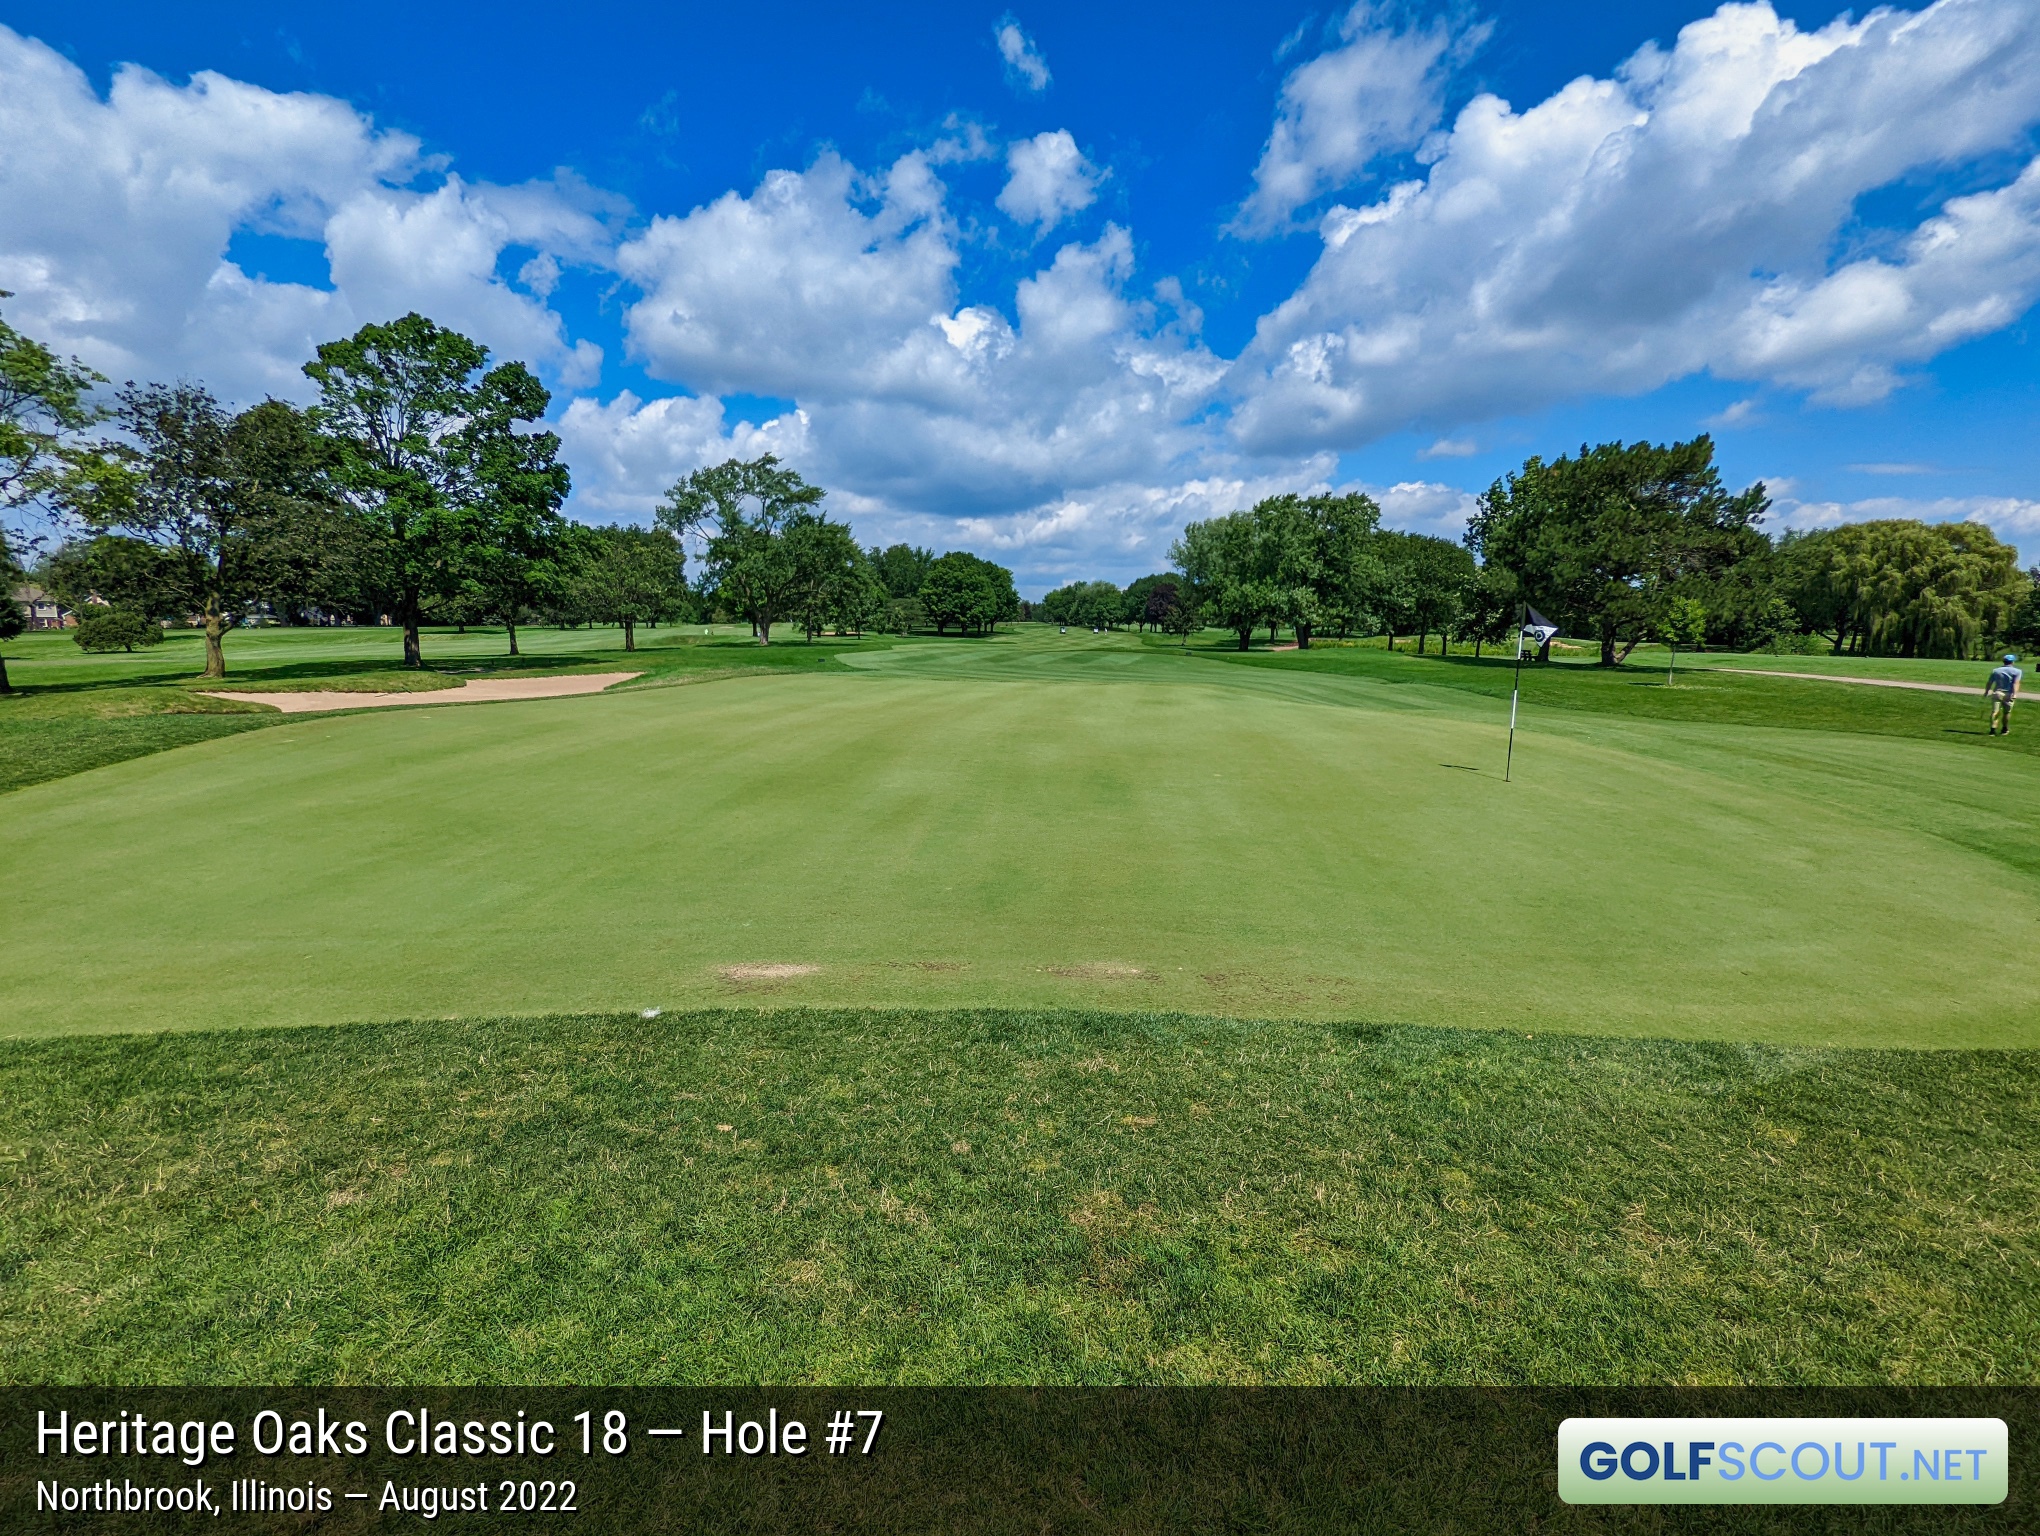 Photo of hole #7 at Heritage Oaks Golf Club - Classic 18 in Northbrook, Illinois. 